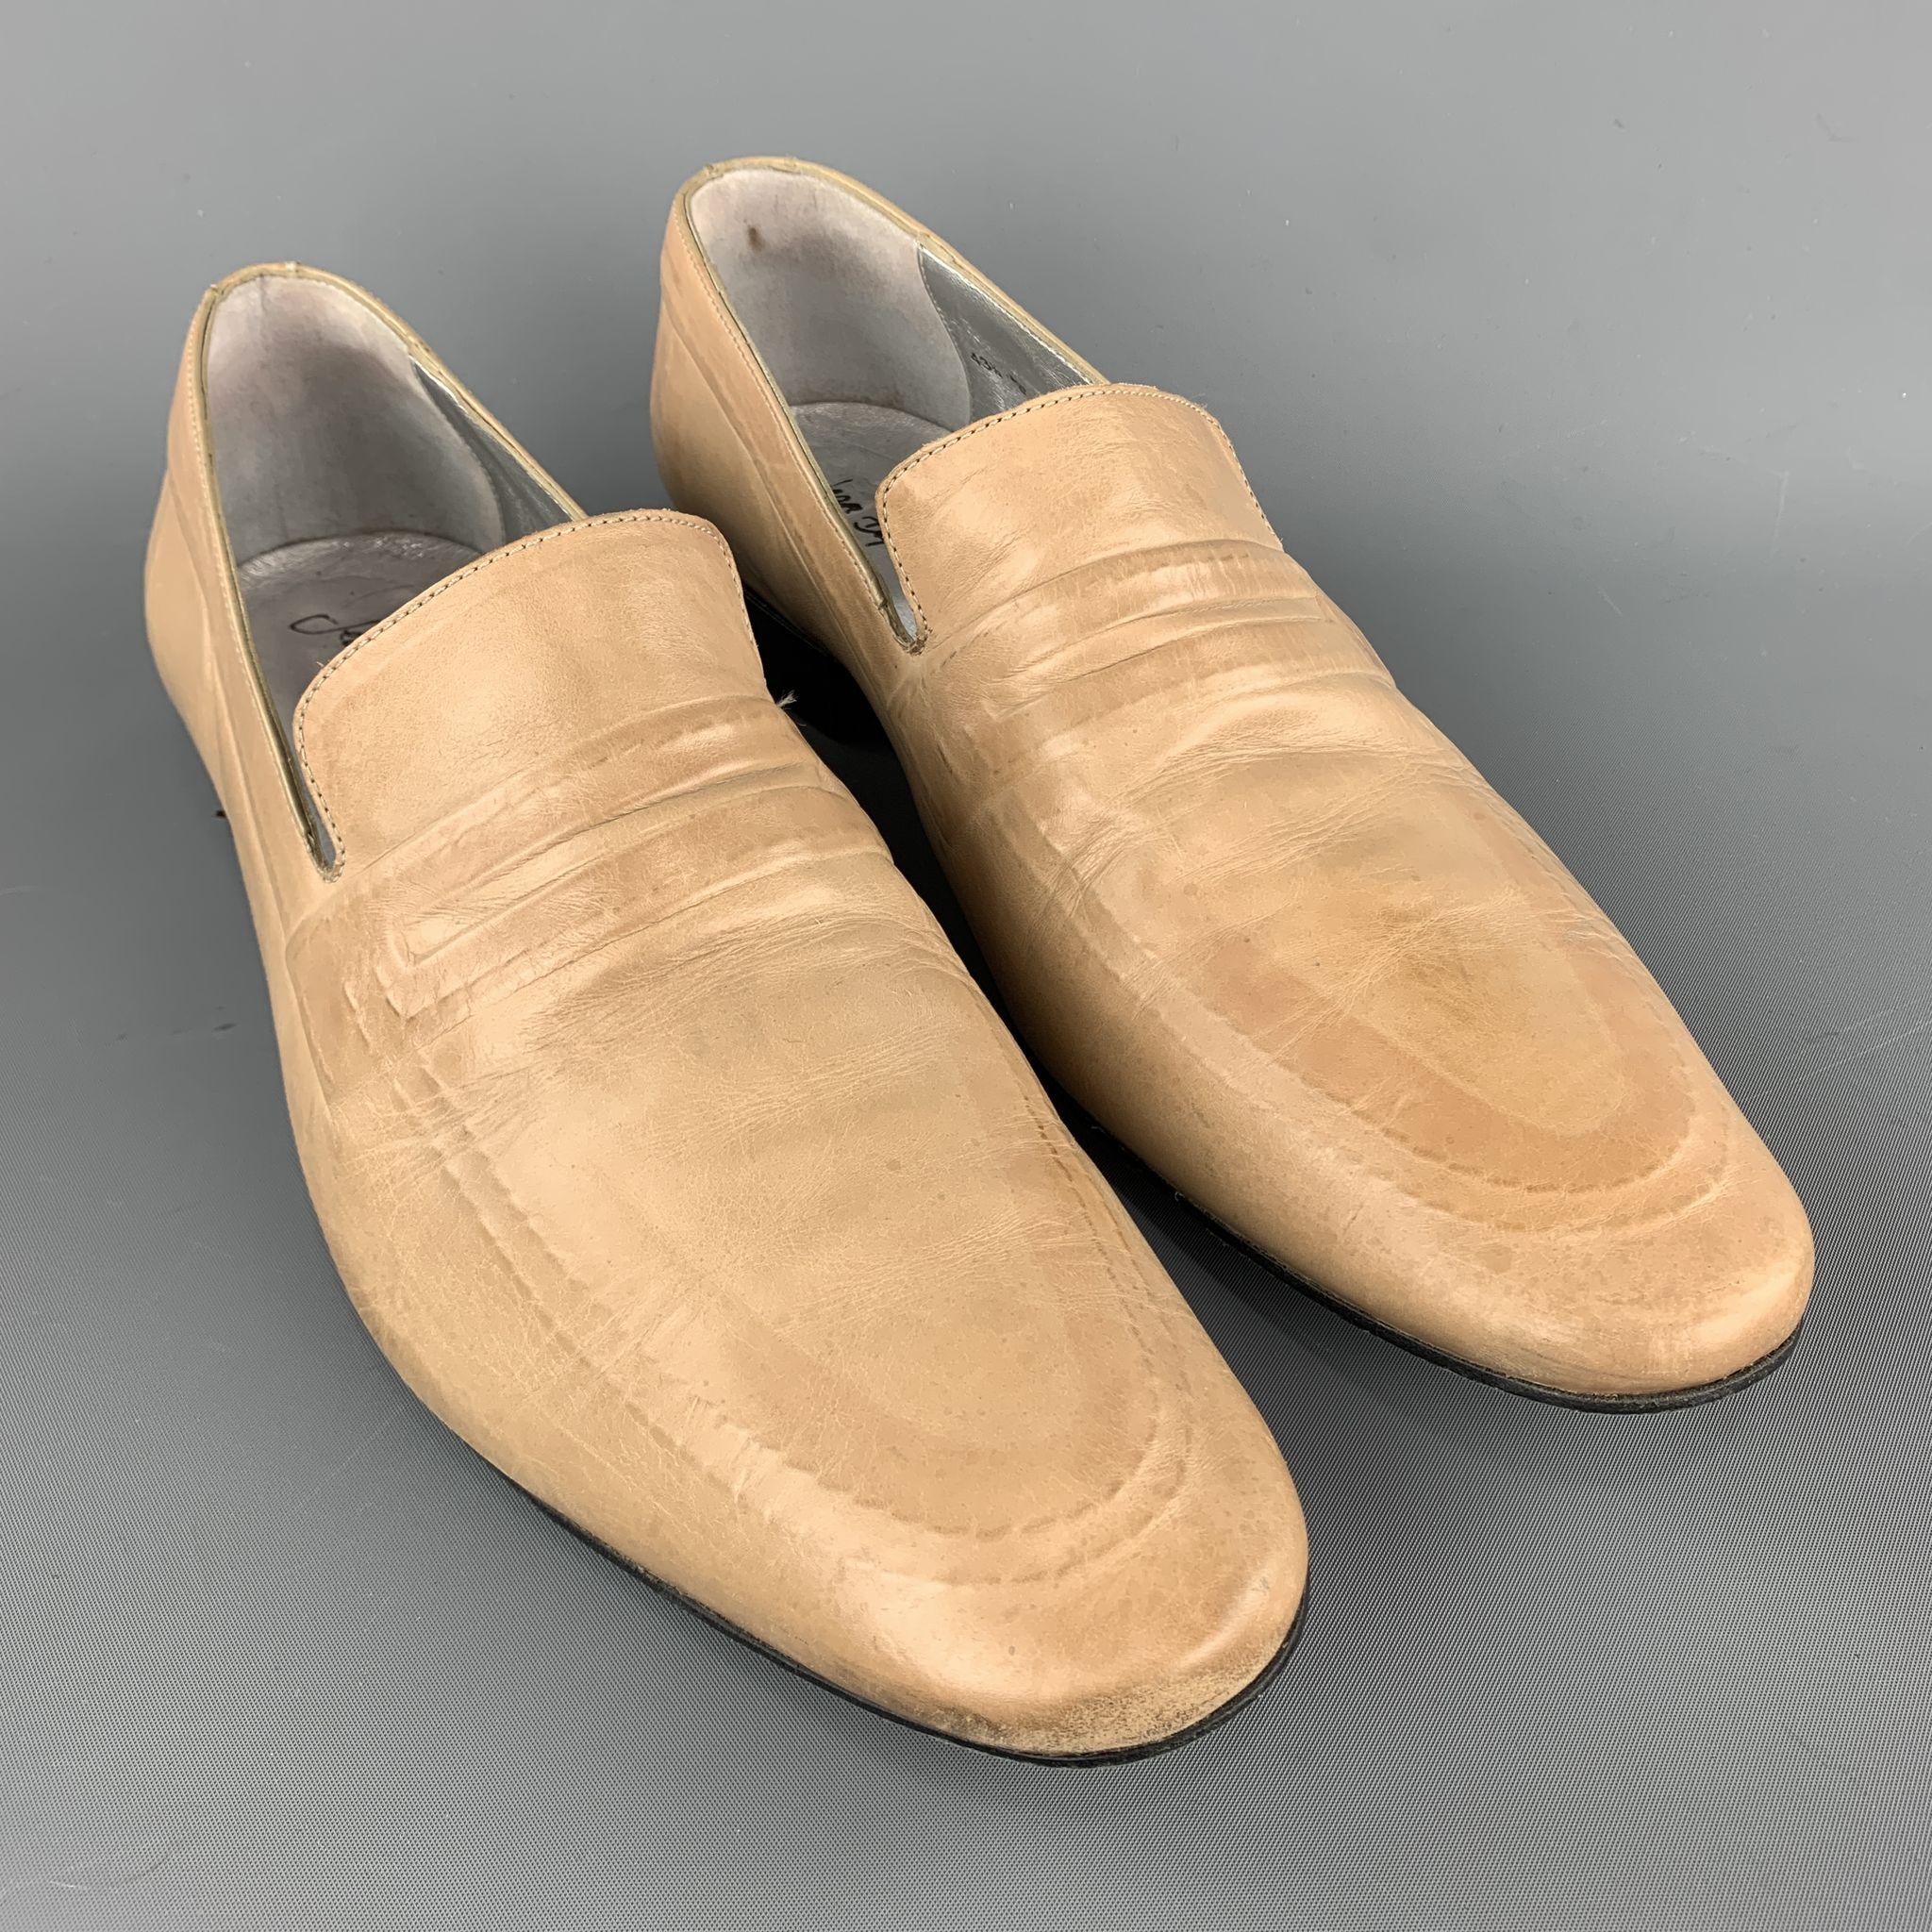 JEAN B. RAUTUREAU loafers comes in a natural leather featuring a slip on style, silver lining, and wooden heel. 
 
Excellent Pre-Owned Condition.
Marked: 43.5 

Outsole: 4 in. x 12 in. 

SKU: 98268
Category: Loafers

More Details
Brand: JEAN B.